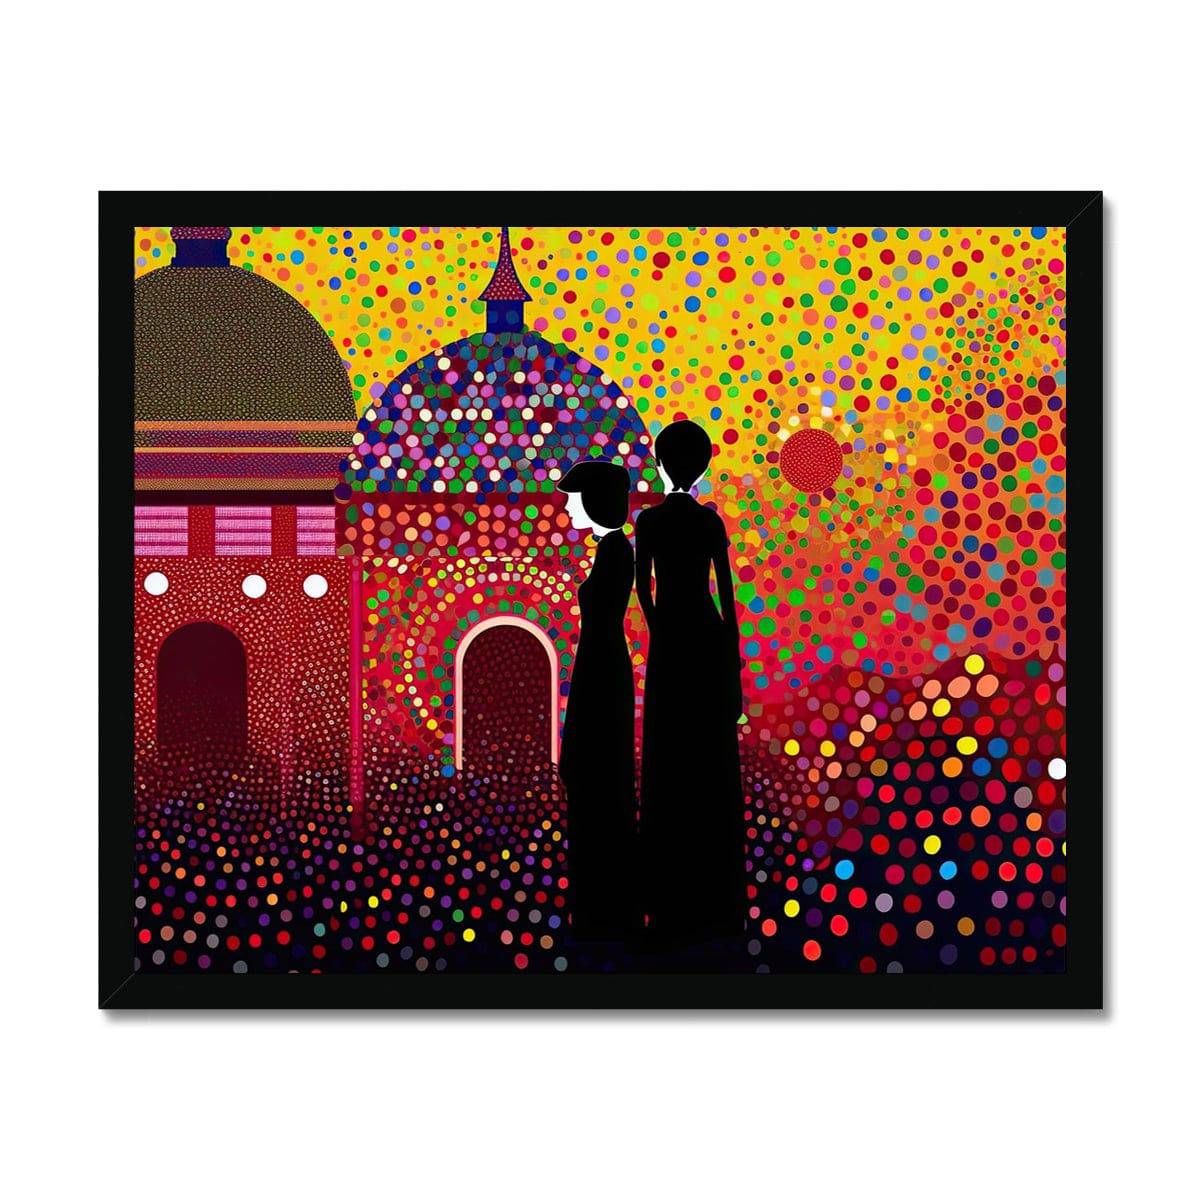 The Point of Love Framed Print - Pixel Gallery